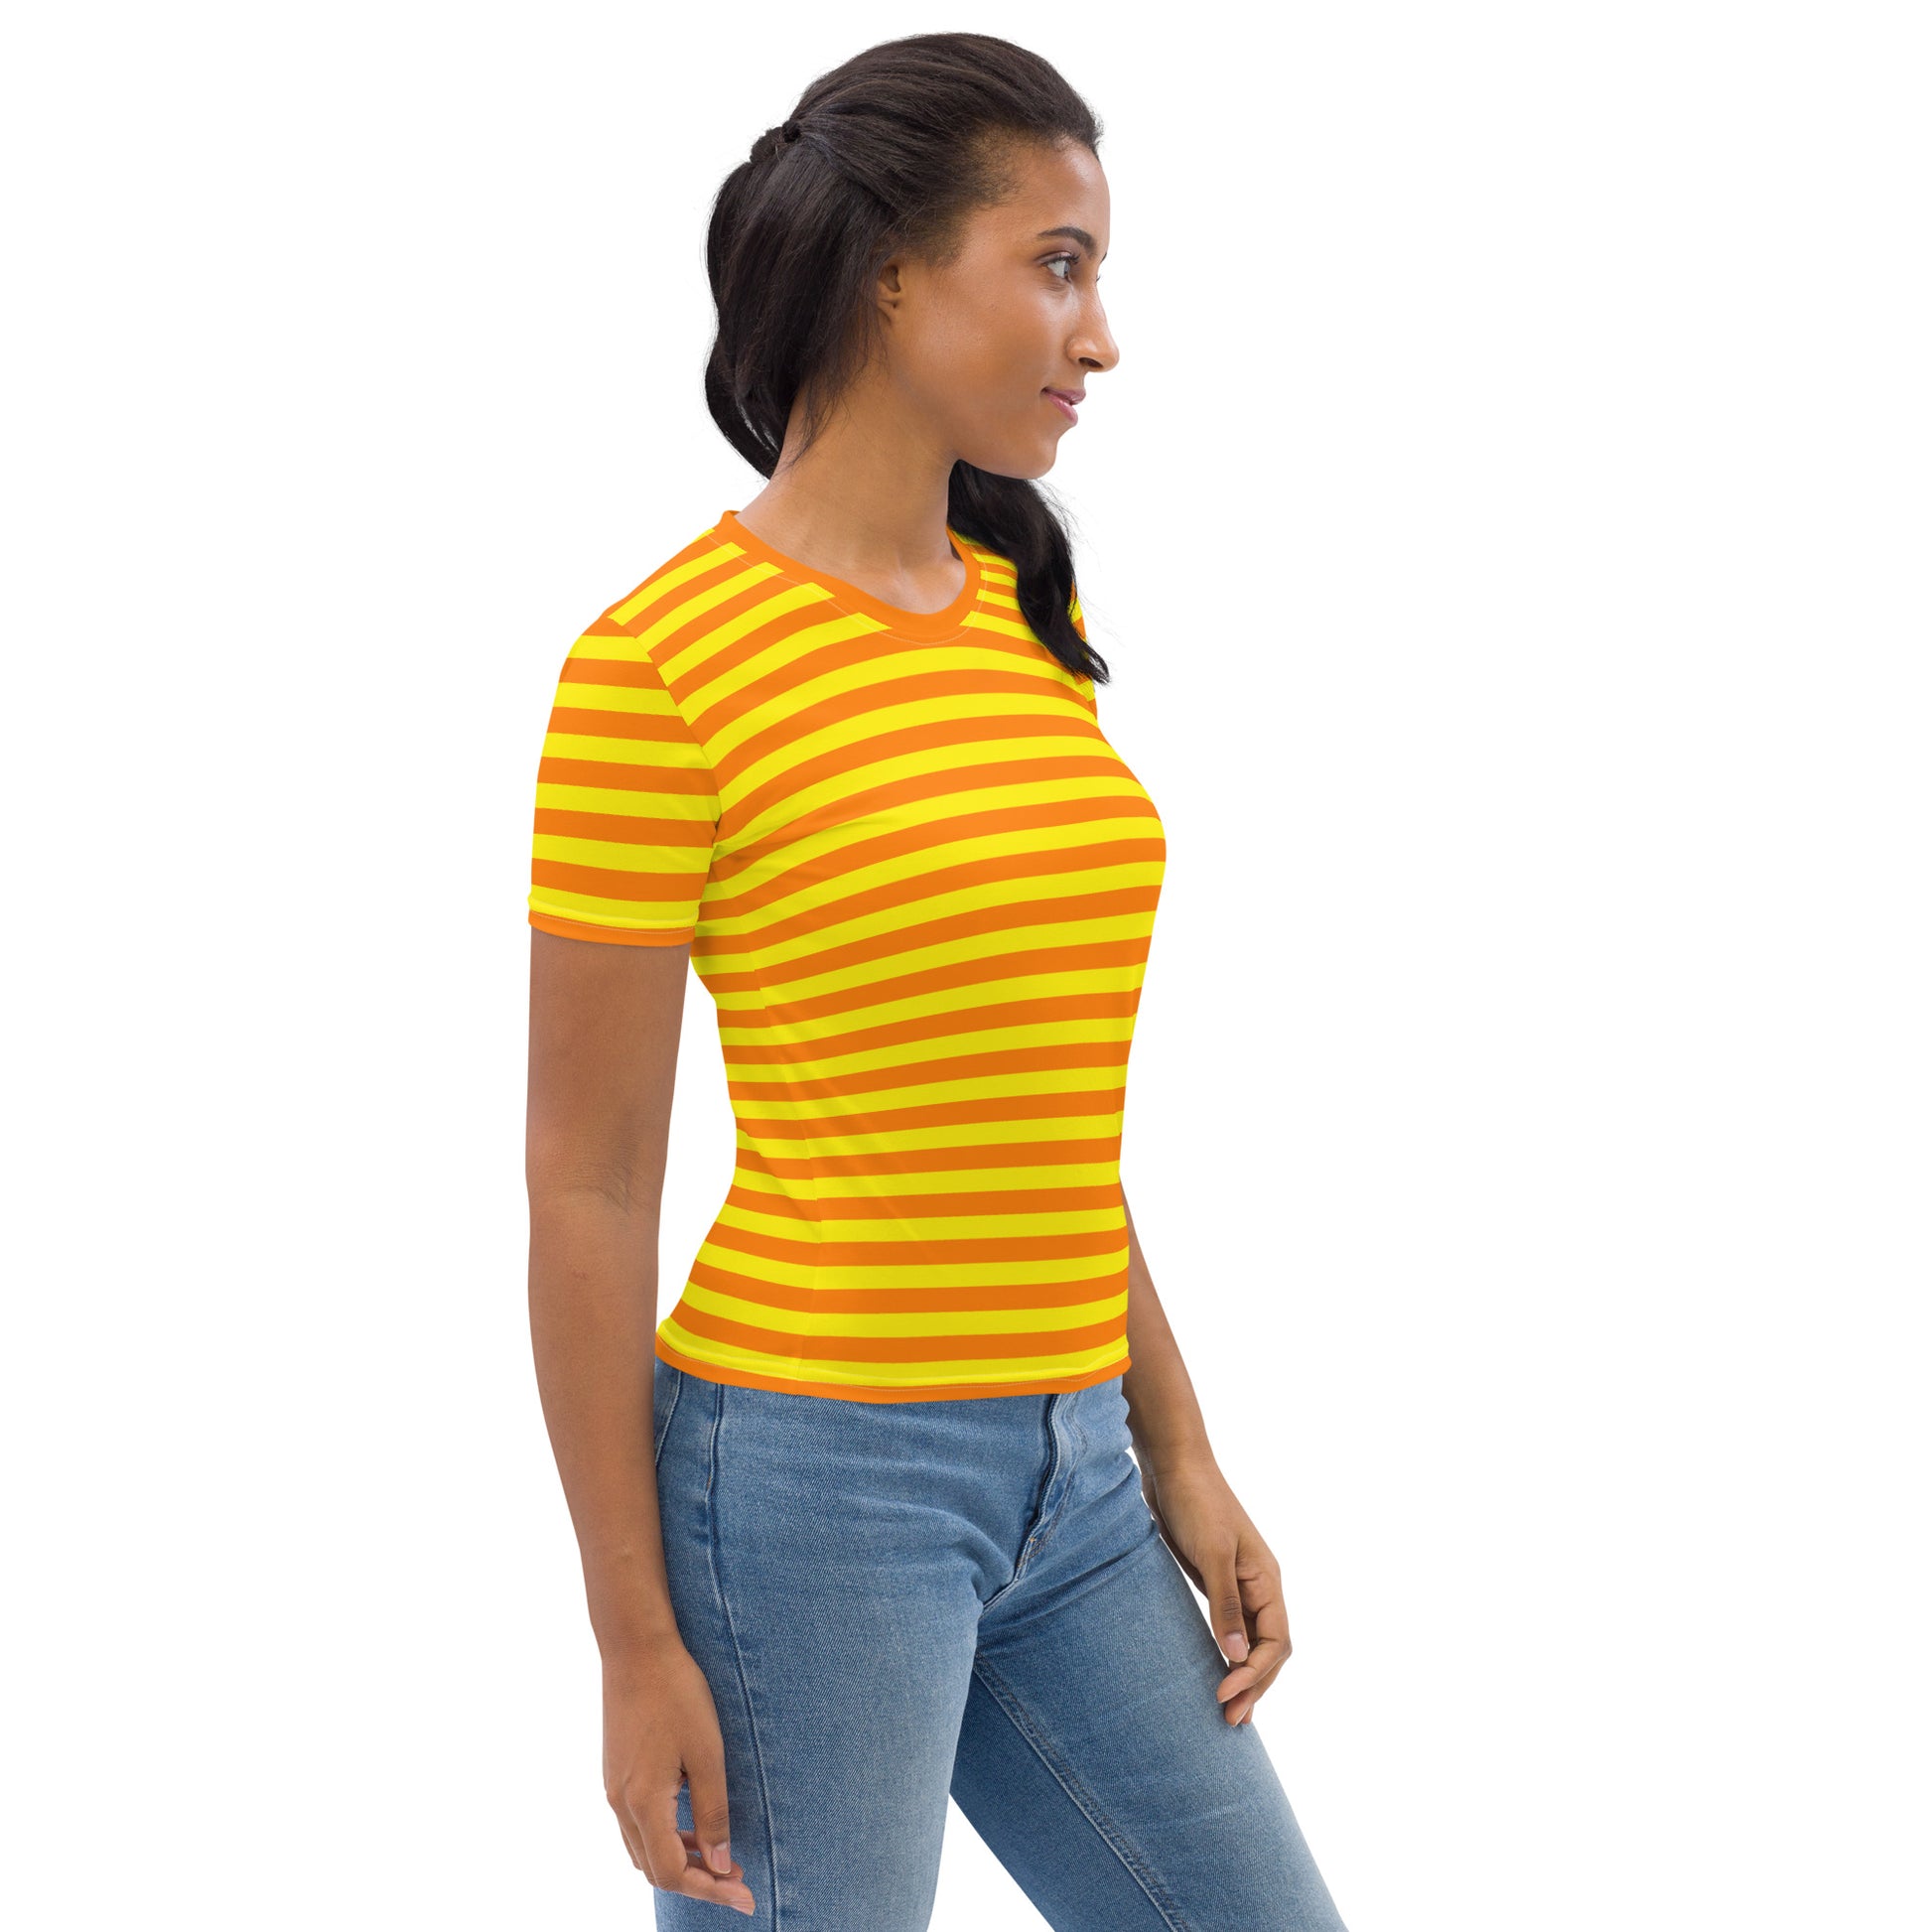 T-shirt in orange and yellow stripes